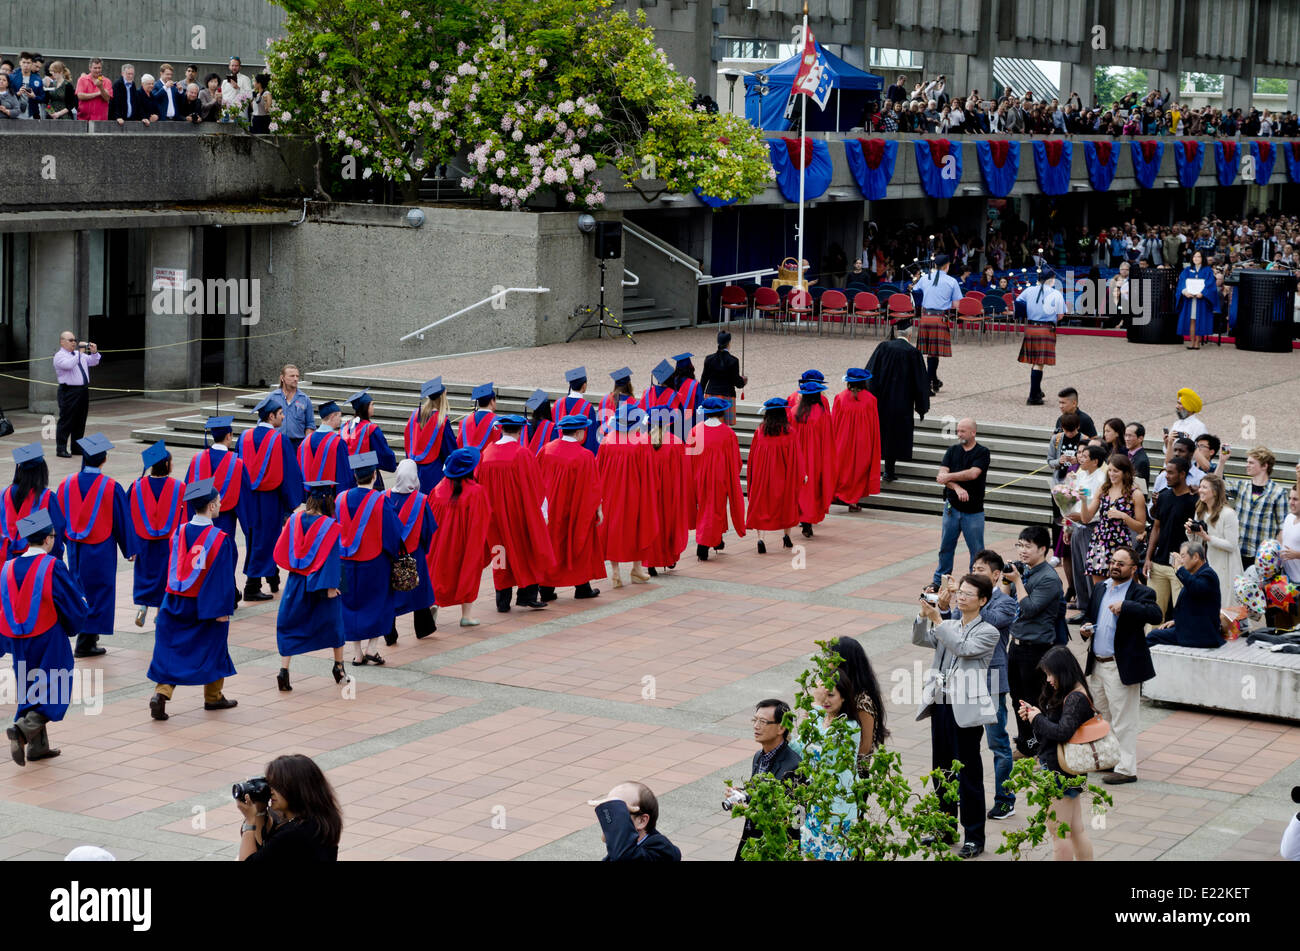 BURNABY, BC, CANADA.  JUNE 12, 2014:  Simon Fraser University graduands walk in procession towards the Convocation Mall during the Spring 2014 convocation ceremony for the Faculty of Arts and Social Sciences.  Credit: Maria Janicki/Alamy. Stock Photo